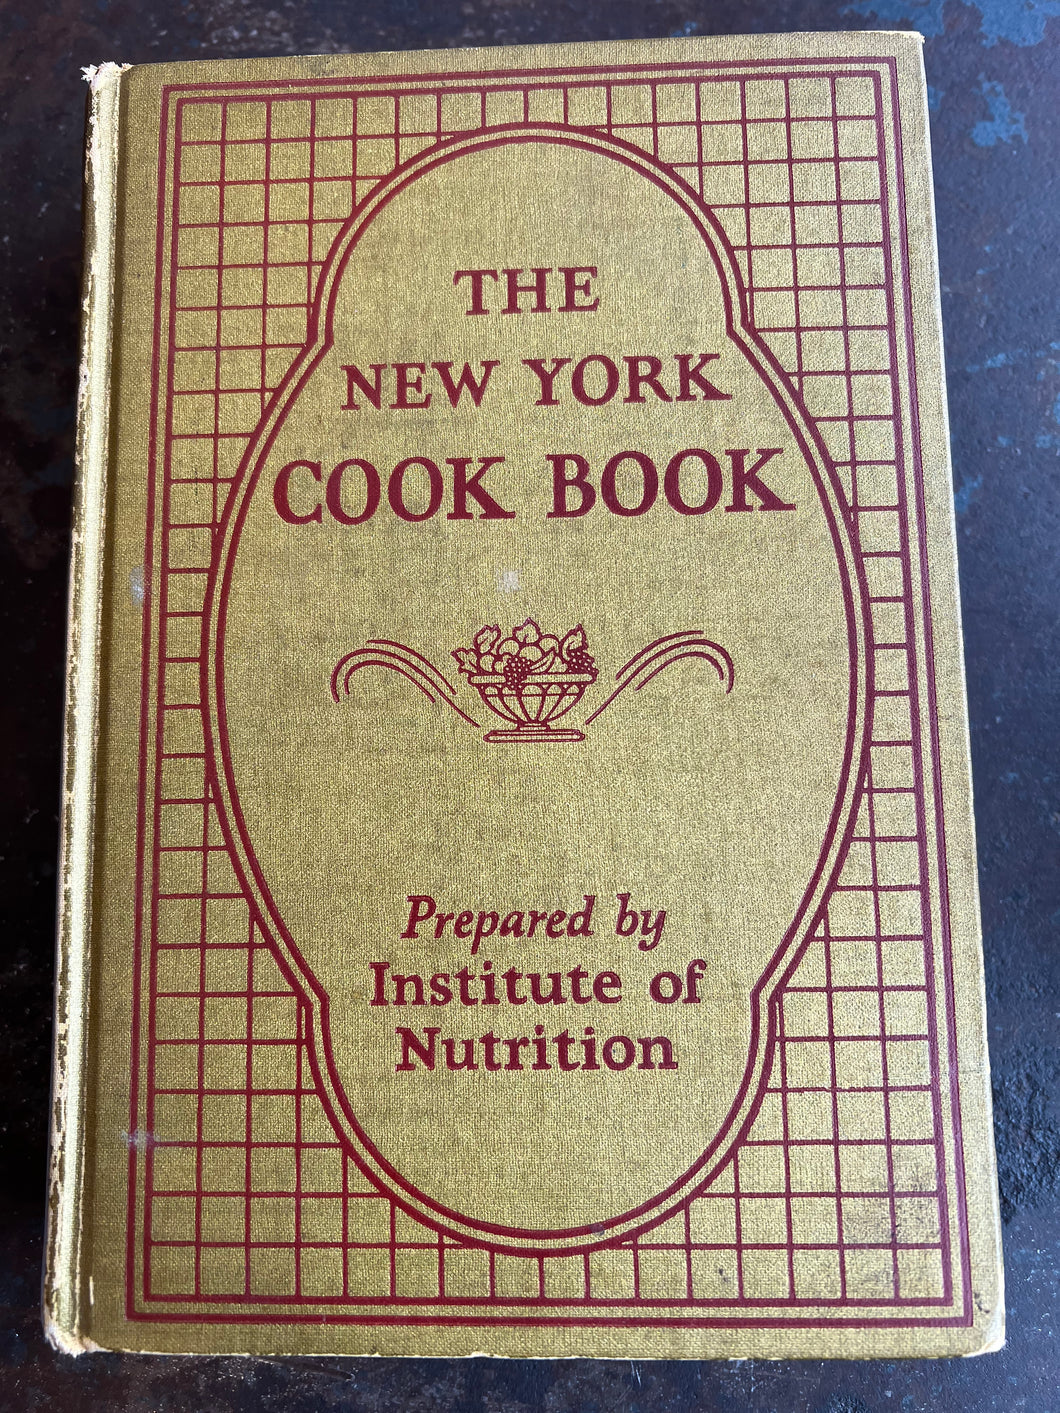 The New York Cook Book by the Institute of Nutrition (1932)